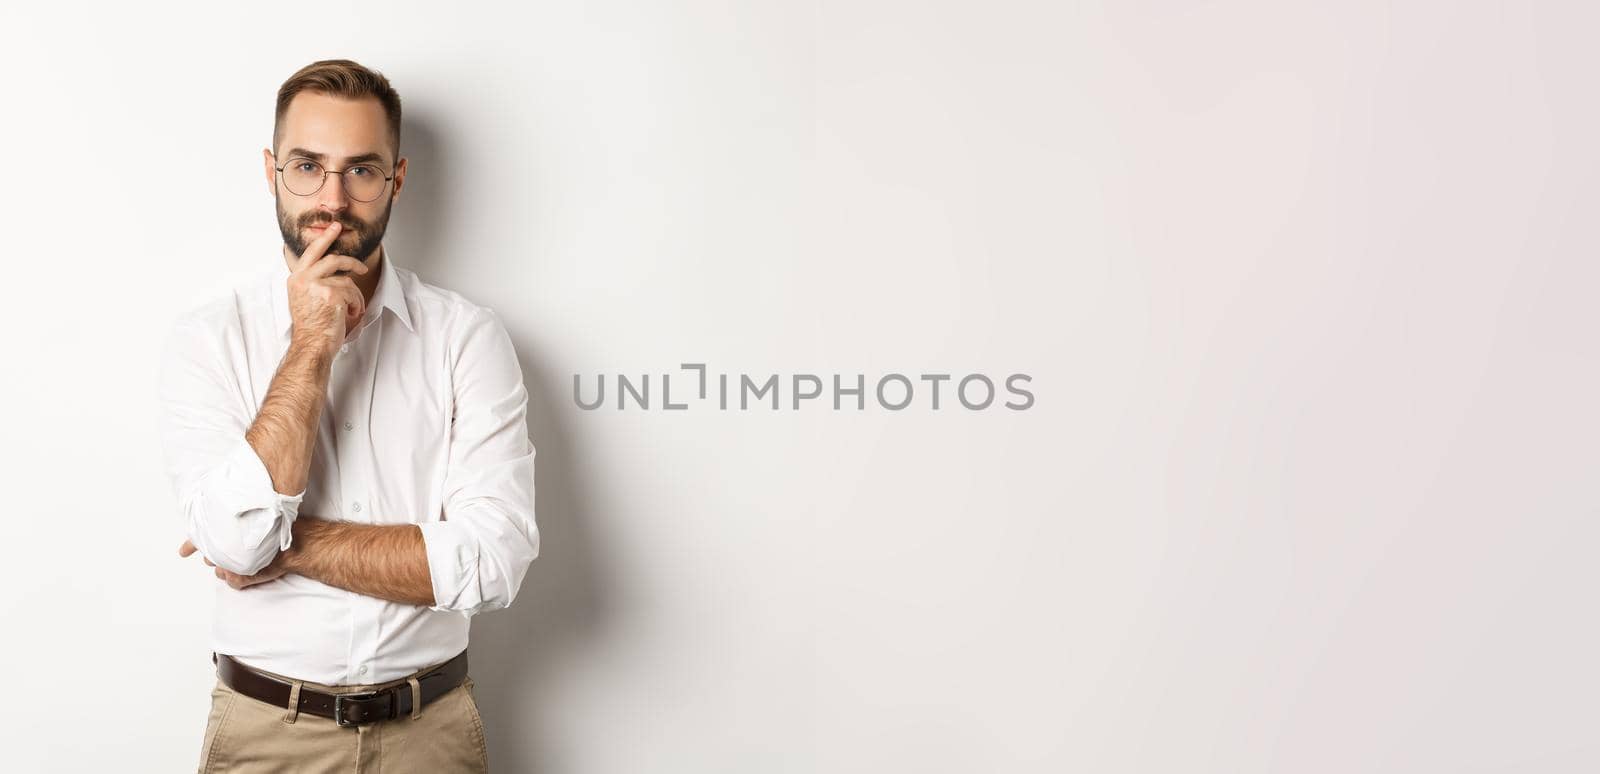 Thoughtful handsome businessman looking at camera, making choice or thinking, standing in glasses and white collar shirt against studio background.